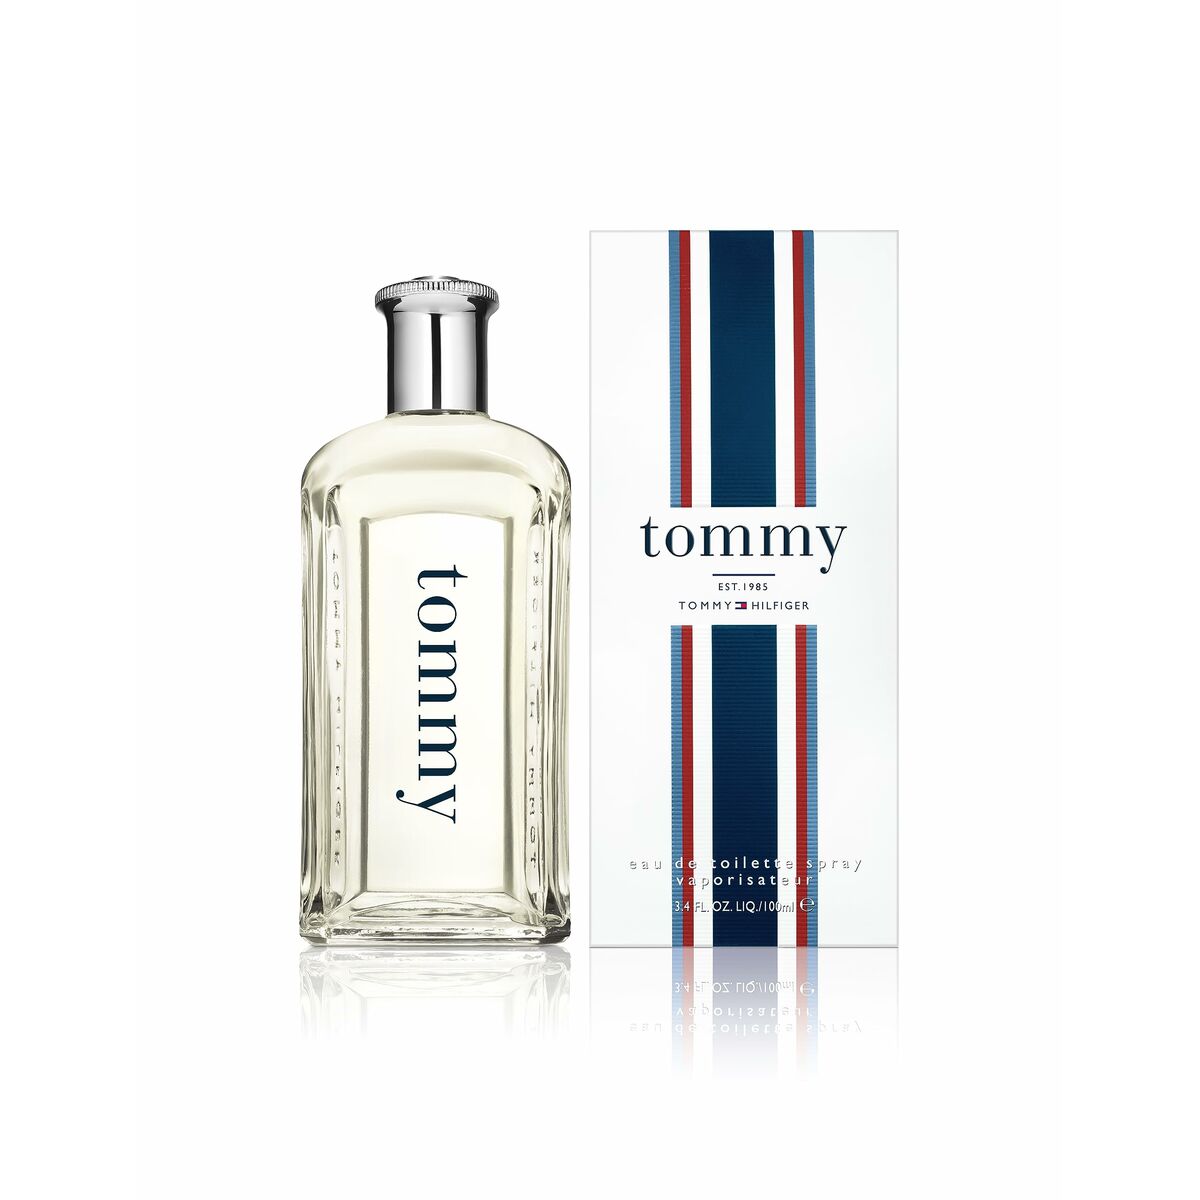 Women's Perfume Tommy Hilfiger EDT Tommy 100 ml-0